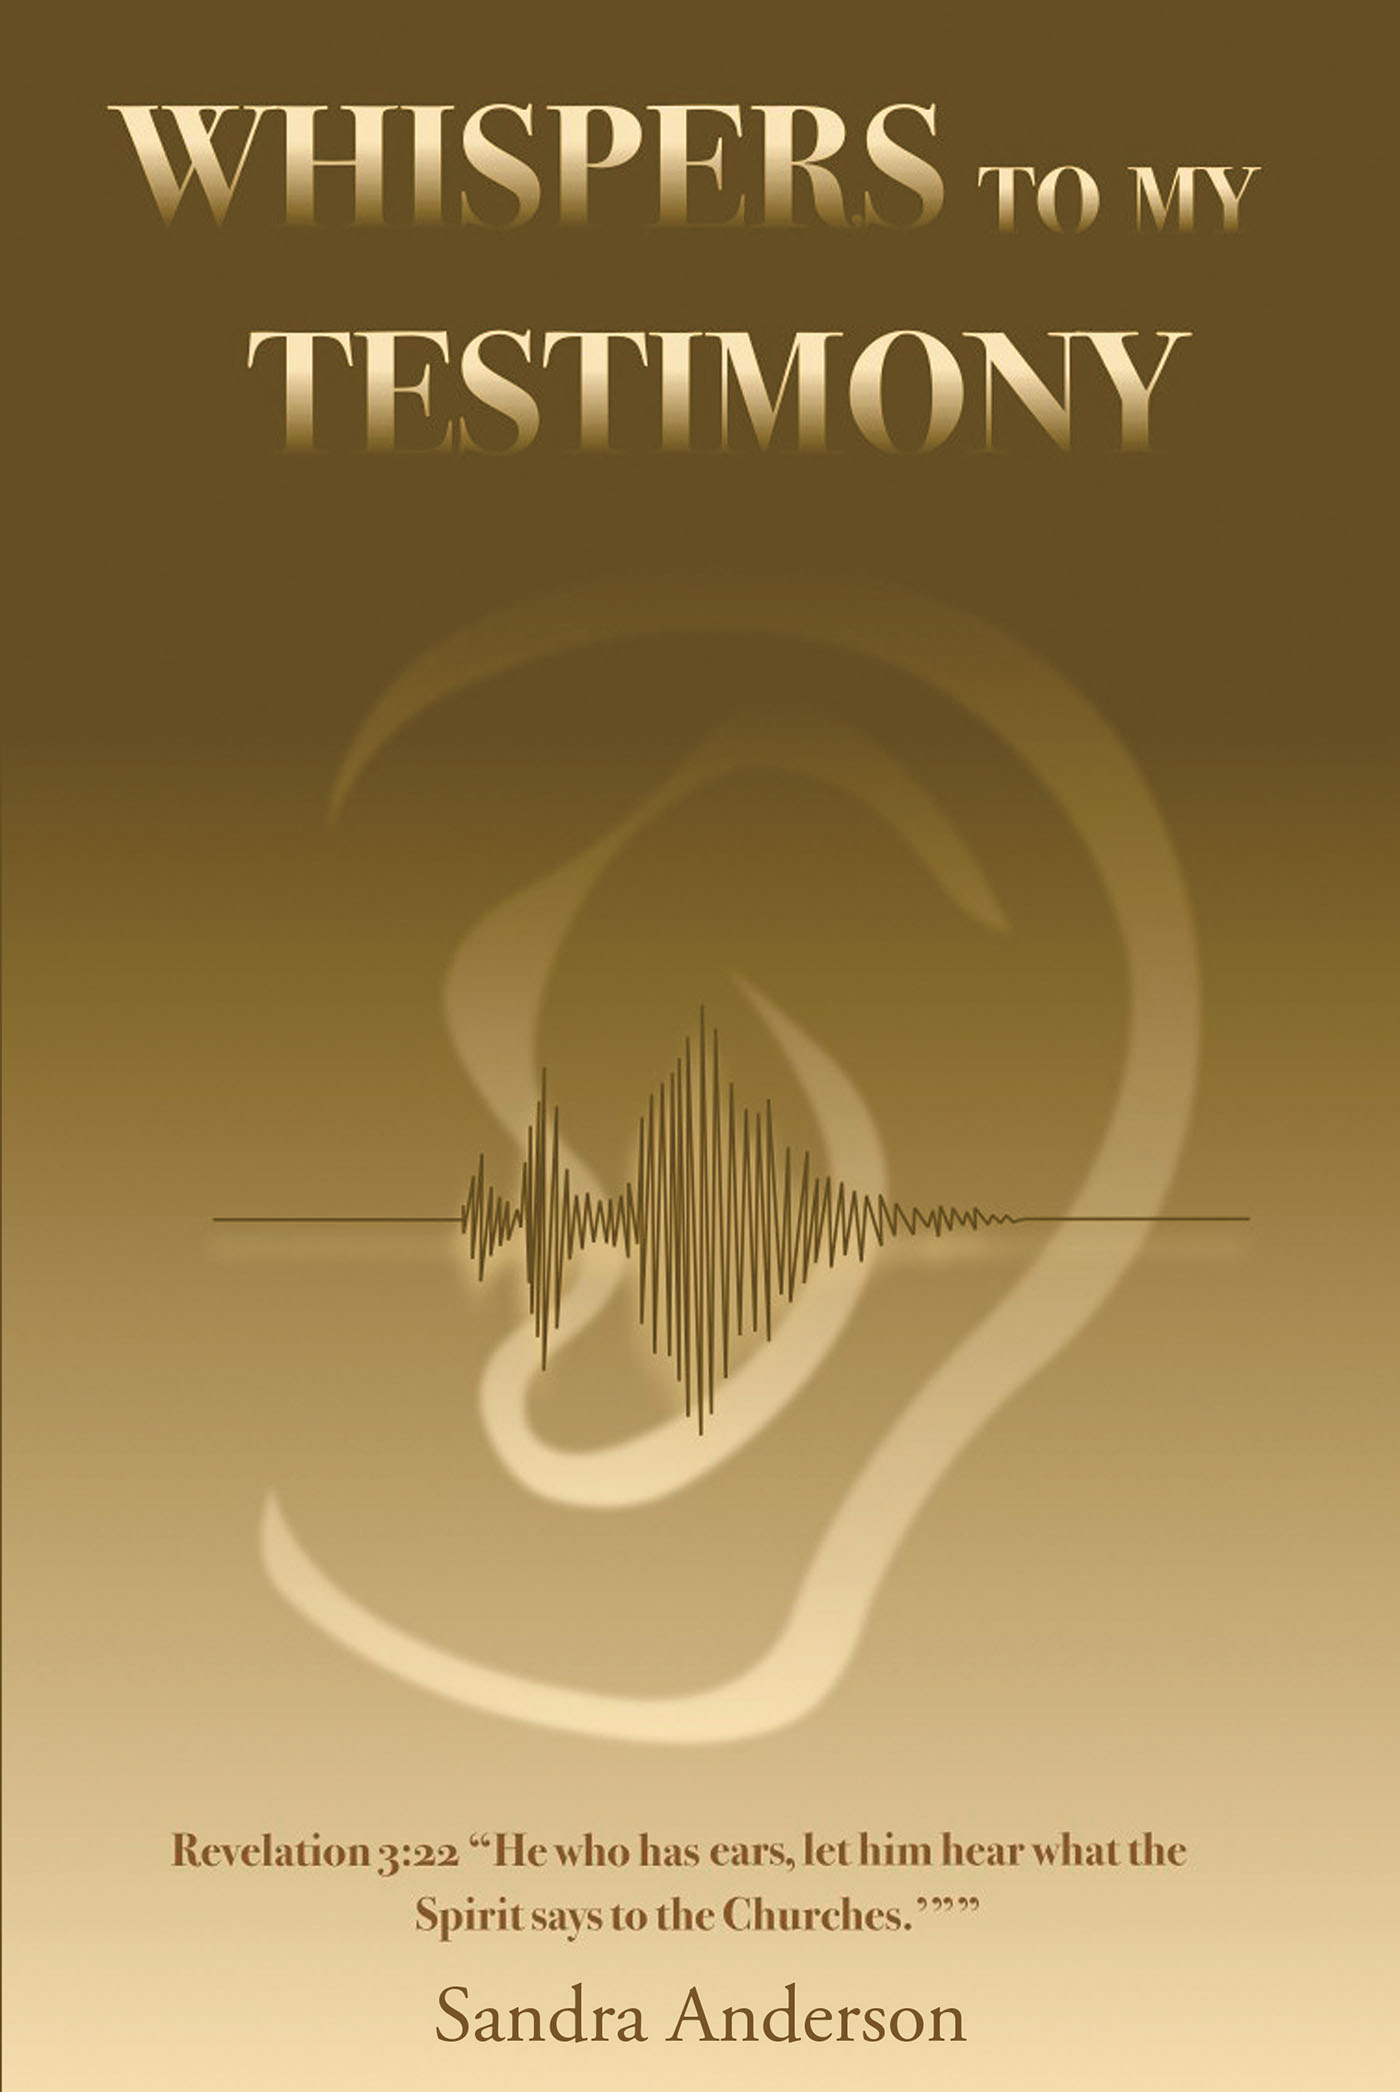 Sandra Anderson’s Newly Released "Whispers to My Testimony" is an Inspiring Reflection on Life’s Journey That Presents Readers with Thoughtful Scripture Selections